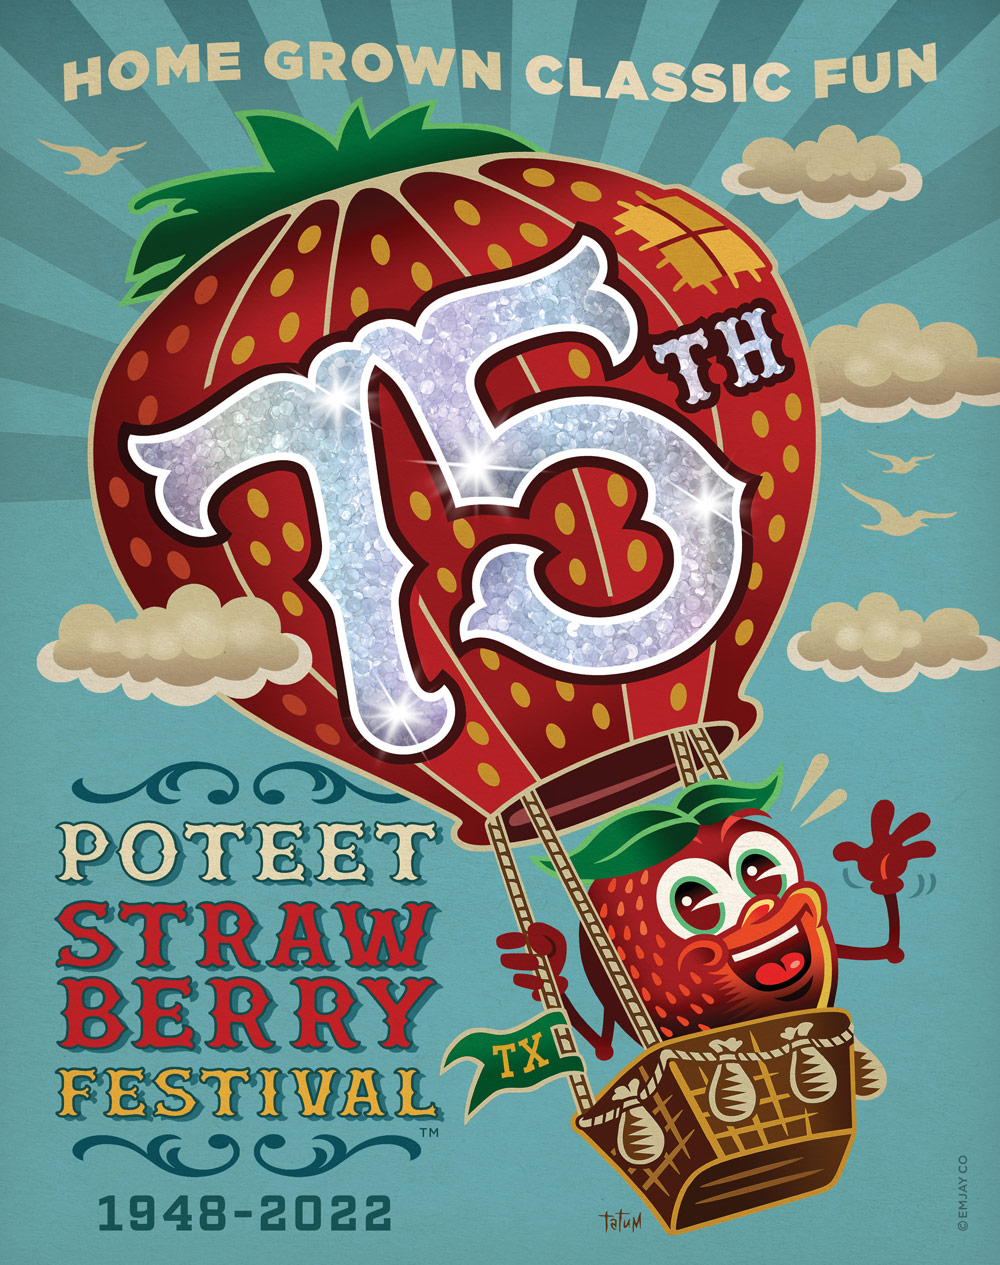 Poteet Strawberry Festival There is something for the whole family!